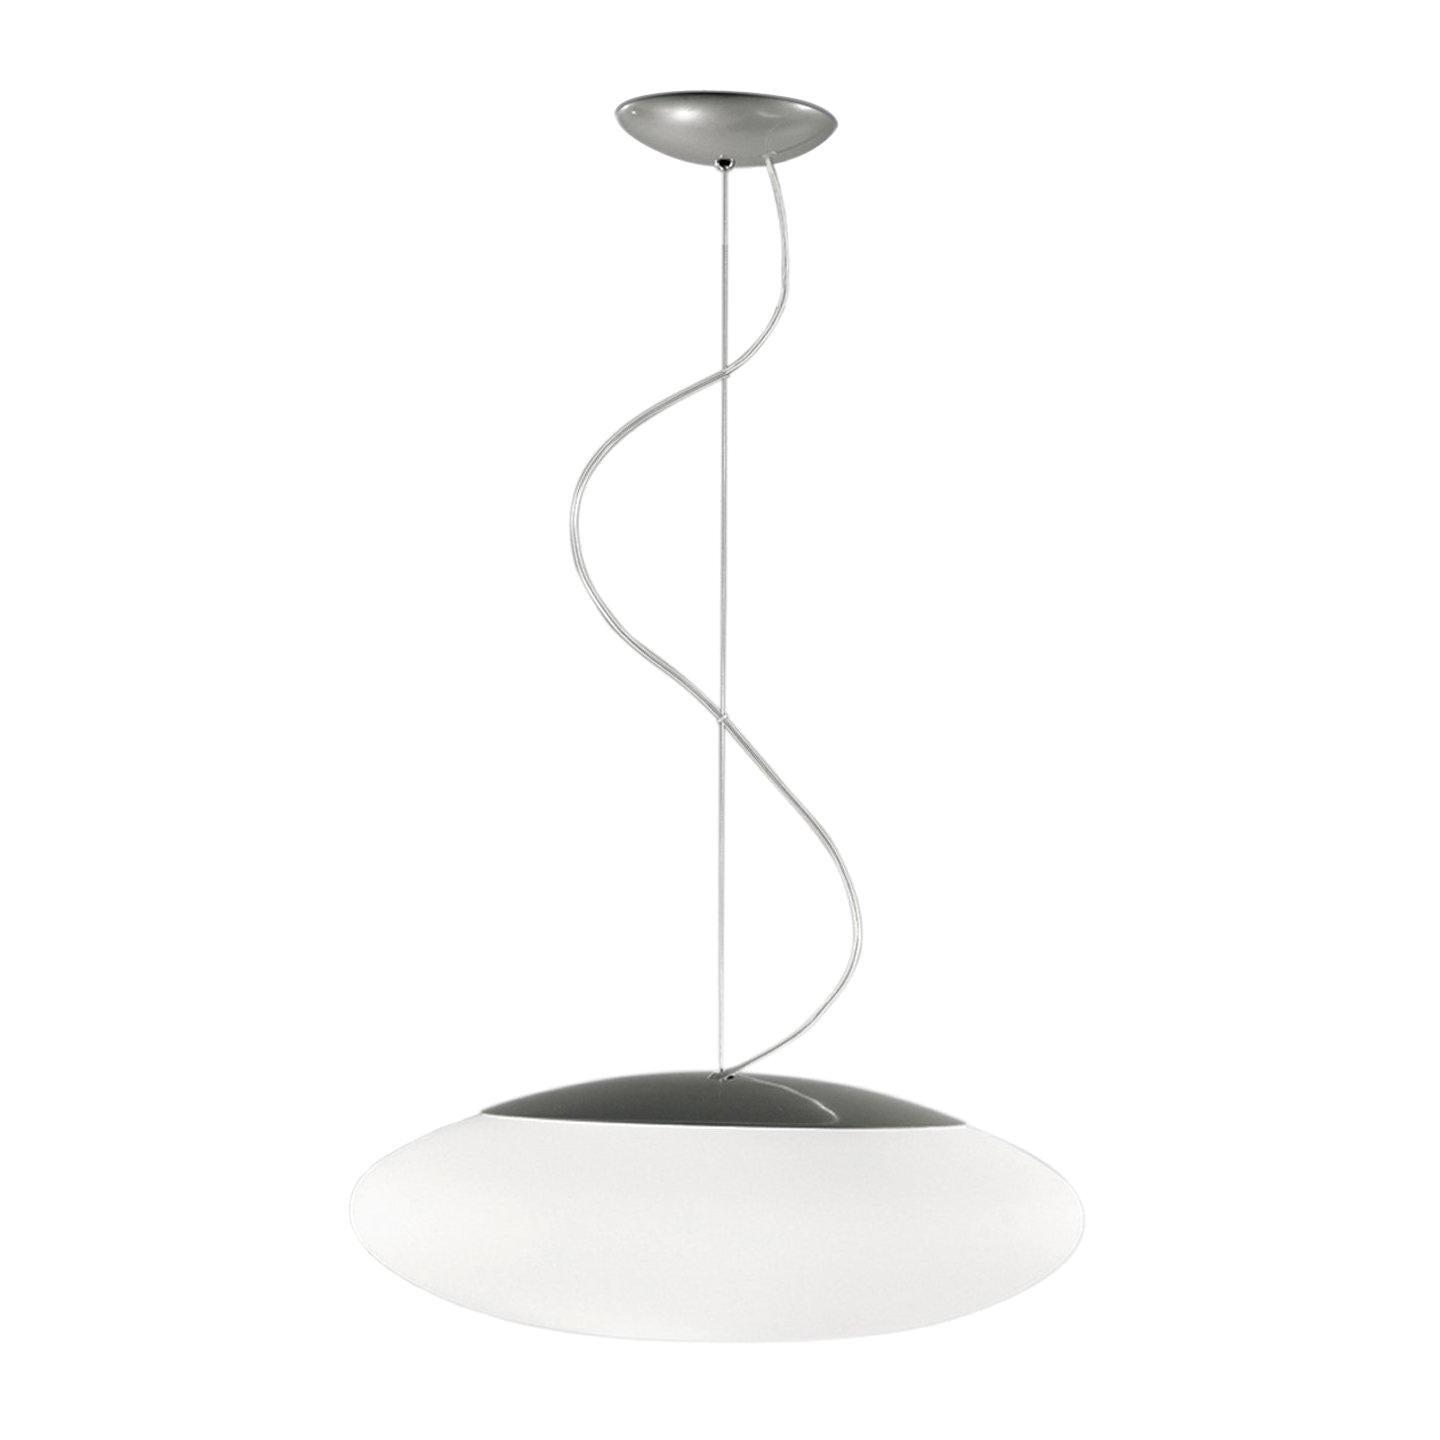 Leucos Felix S 55 Pendant Light in Satin White and Gray by Design Lab